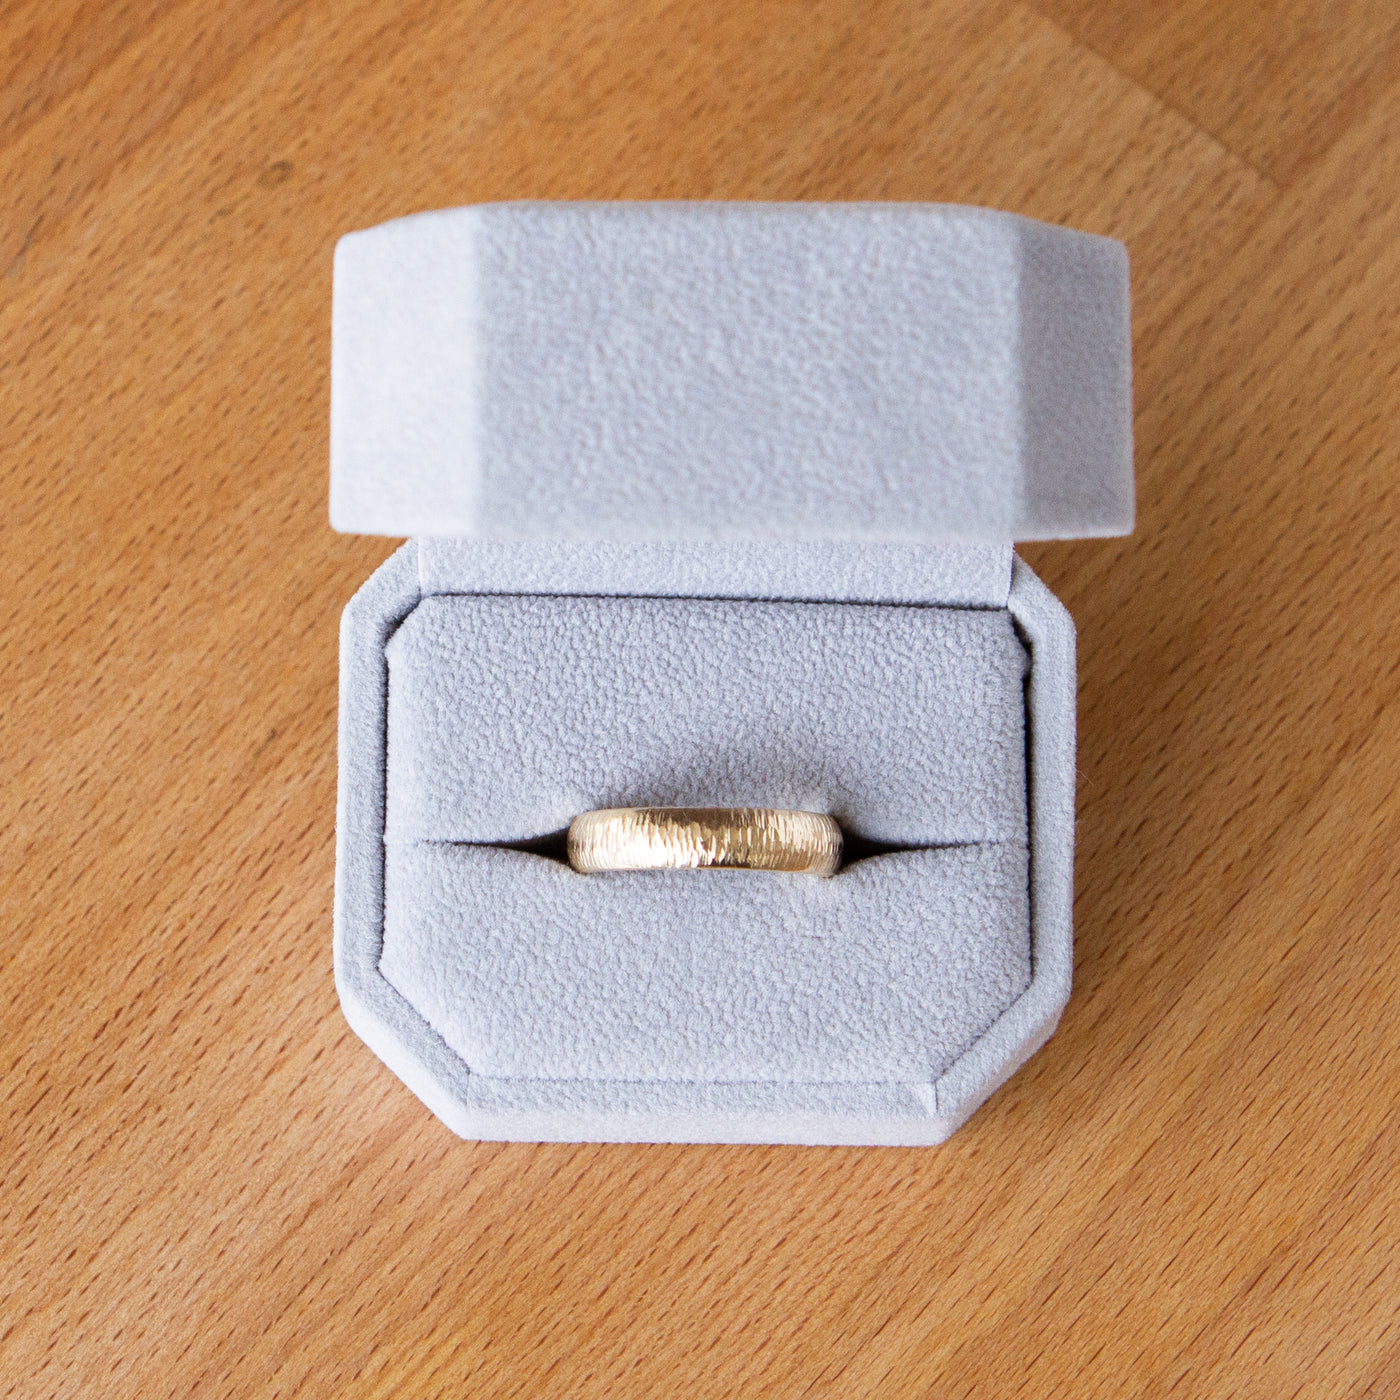 Wide Zion half round yellow gold vertical hammered wedding band in a ring box